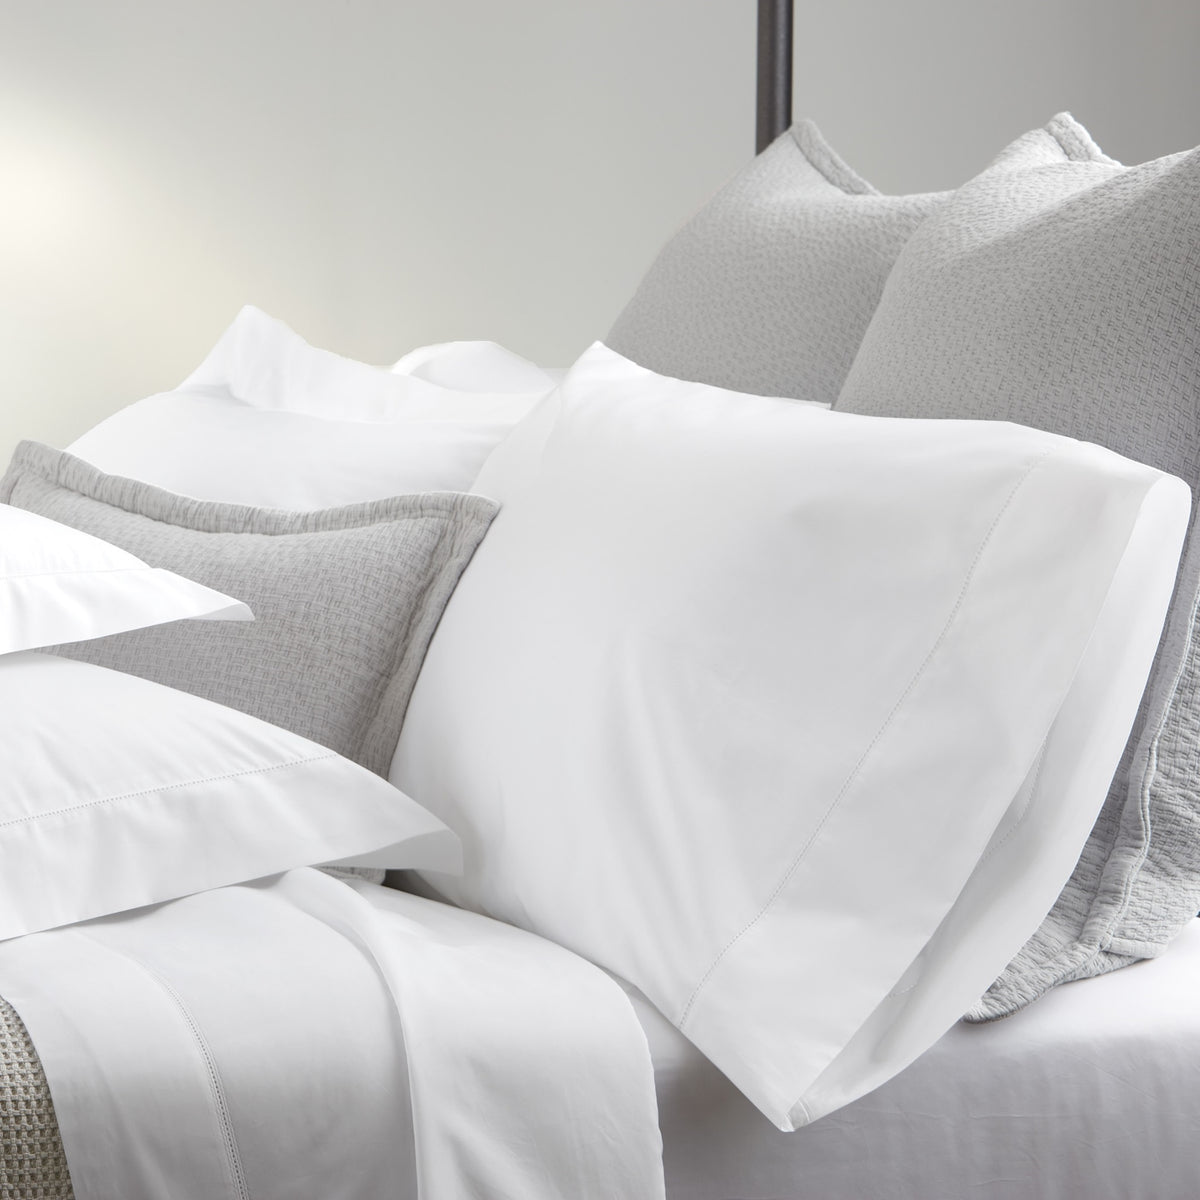 Lifestyle Image of Matouk Milano Hemstitch Bedding in Color White